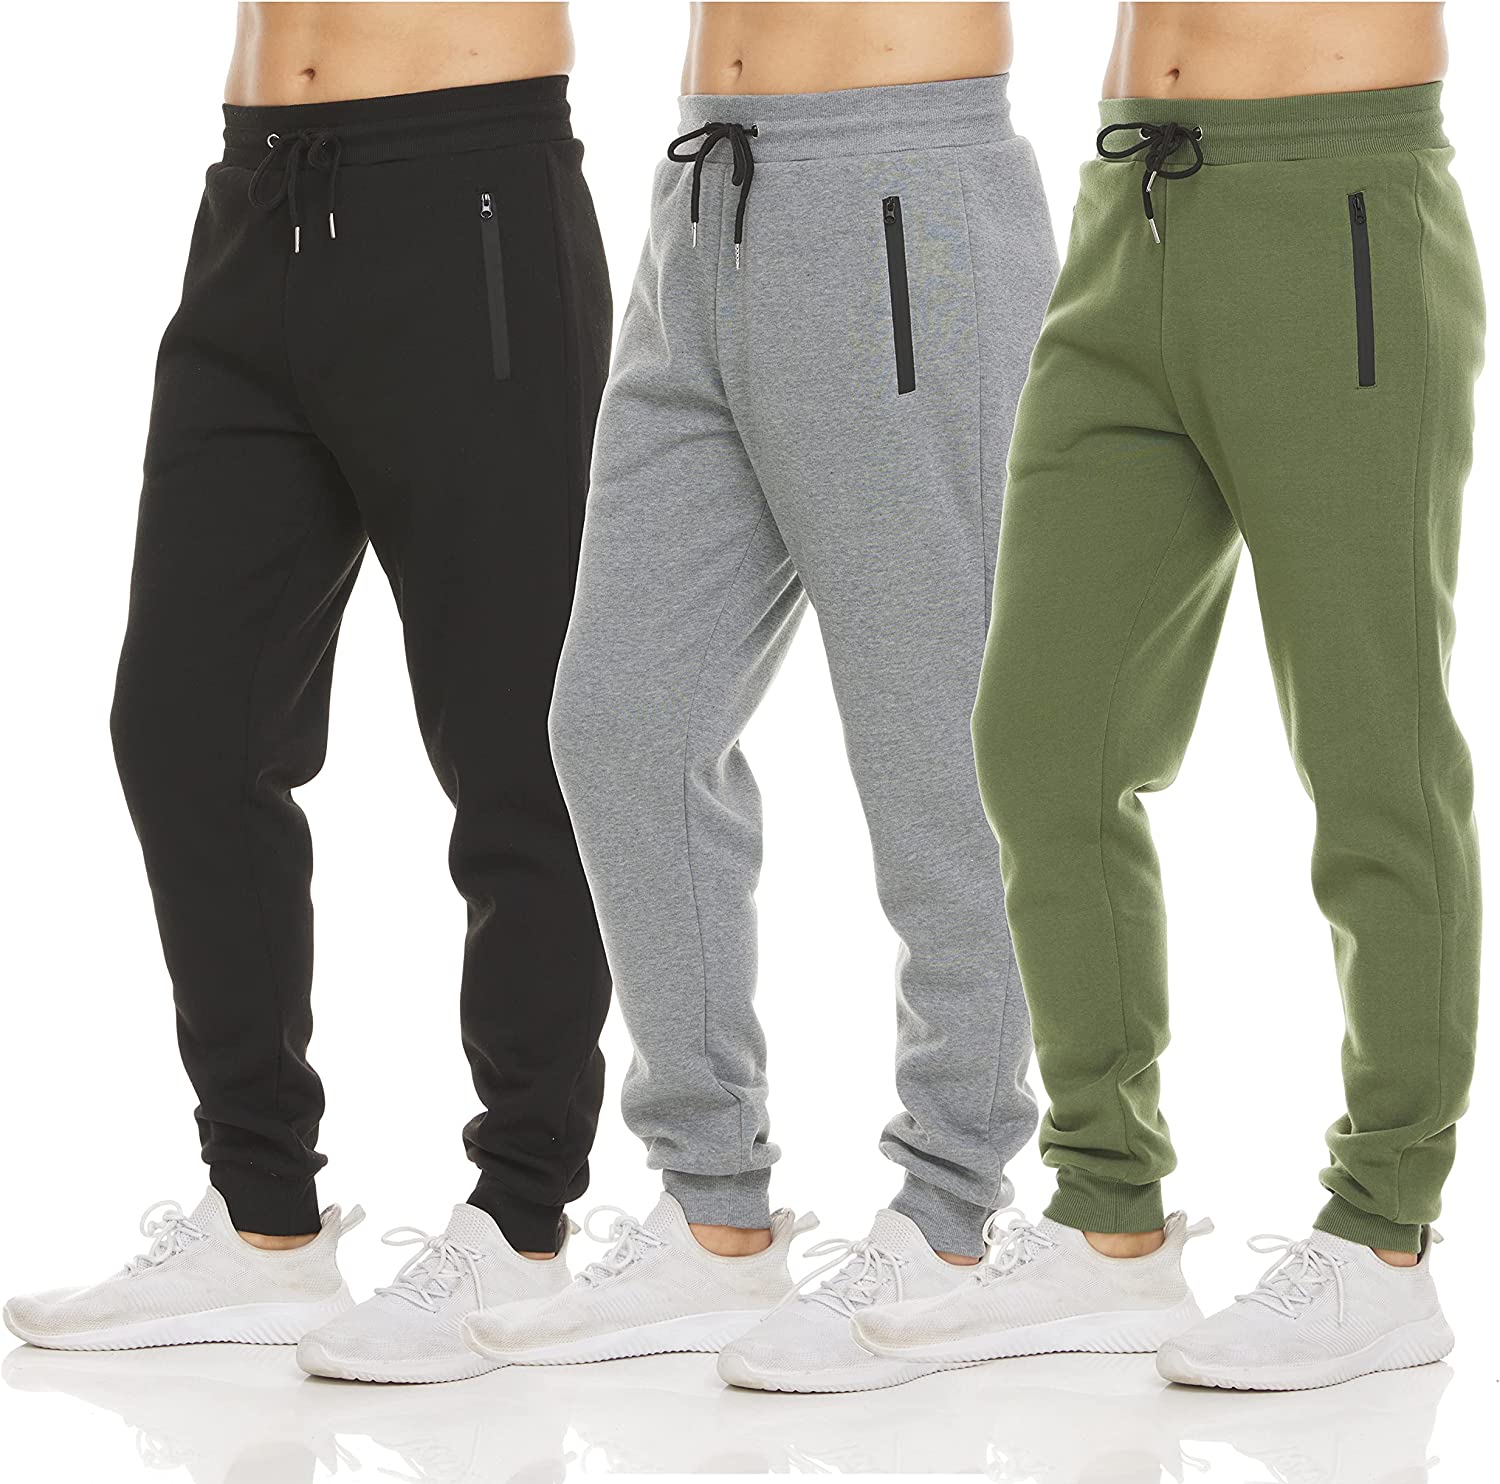 Toddler Boys Girls Sweatpants Cotton Active Jogger Pants with Pockets 1-7T,  3-Pack